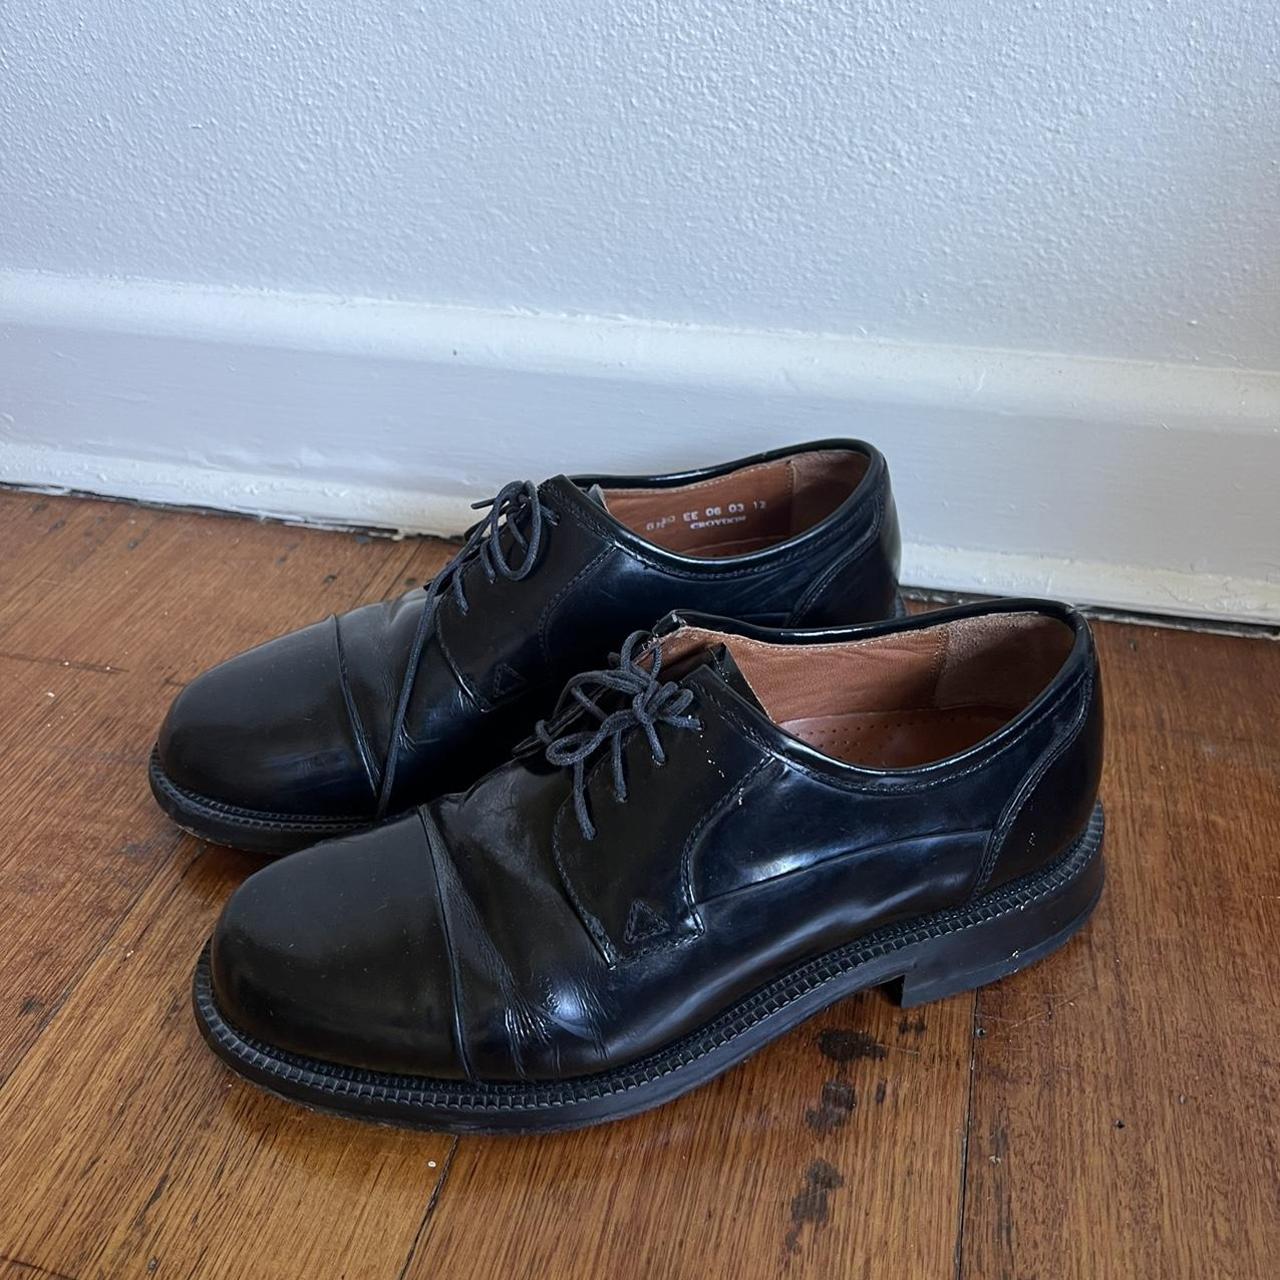 Real leather shoes in size 9 vintage - Depop